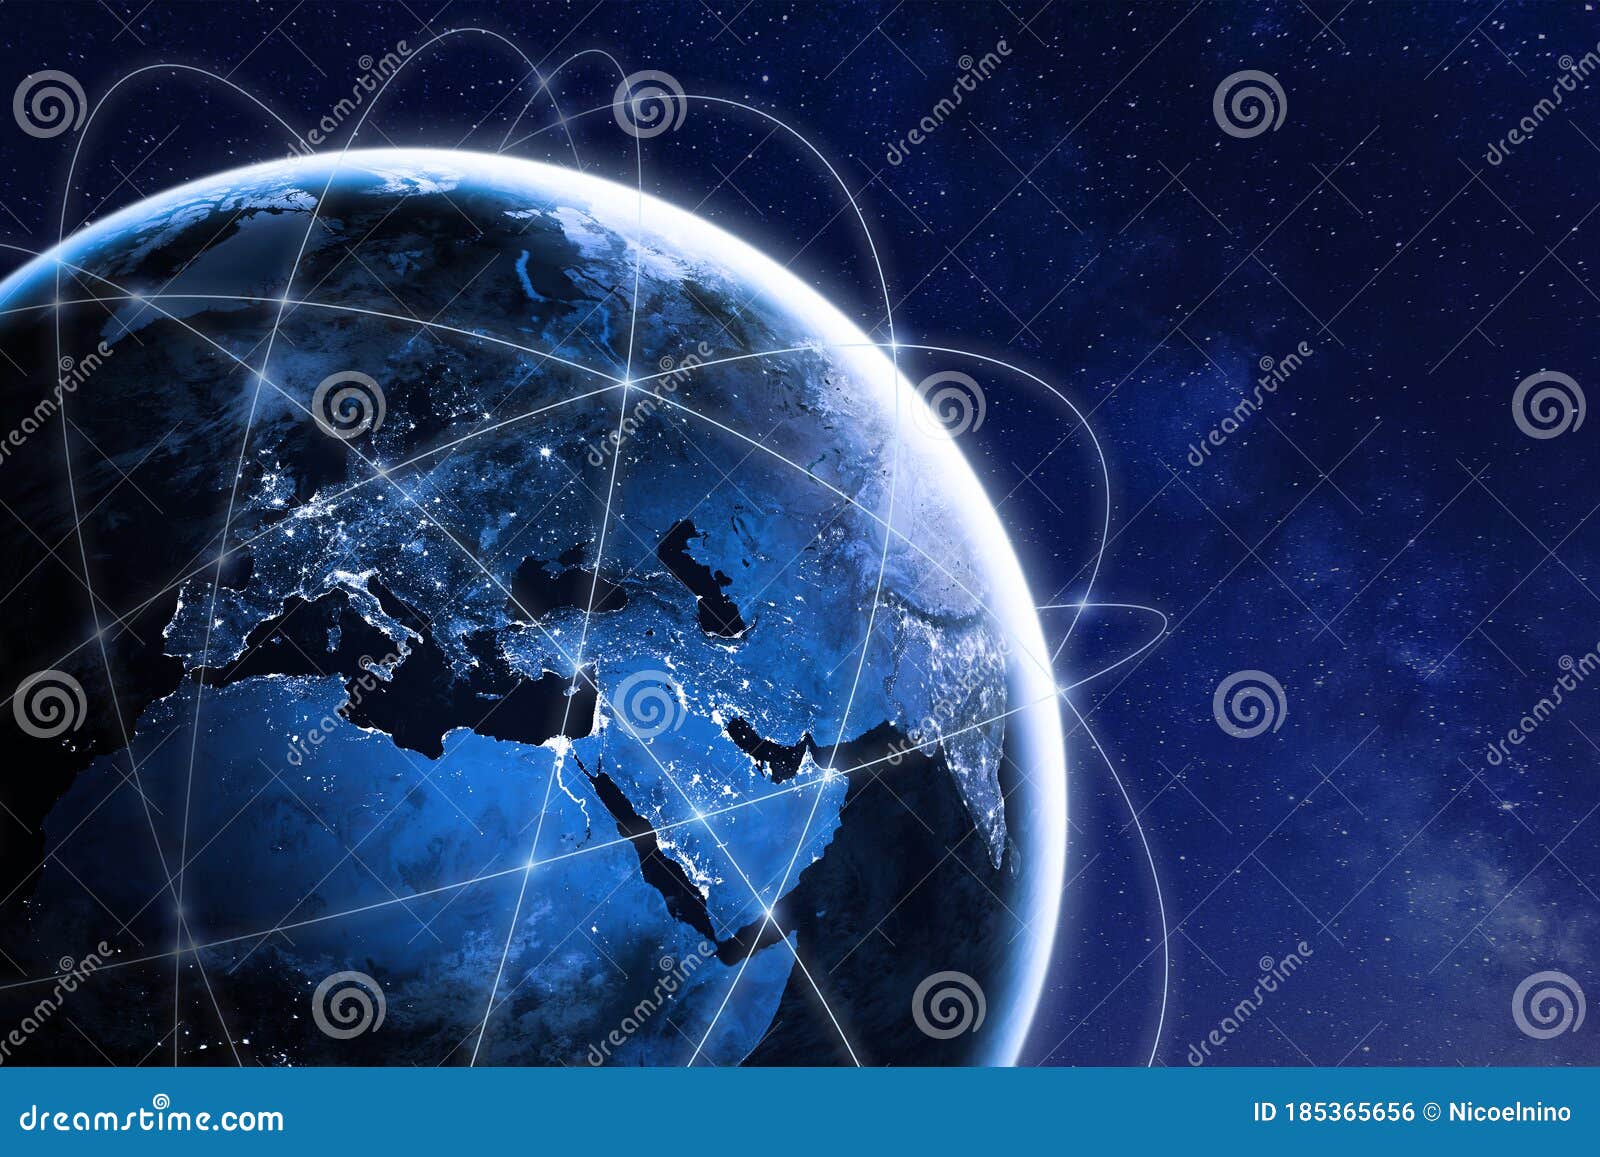 global connectivity concept with worldwide communication network connection lines around planet earth viewed from space, satellite